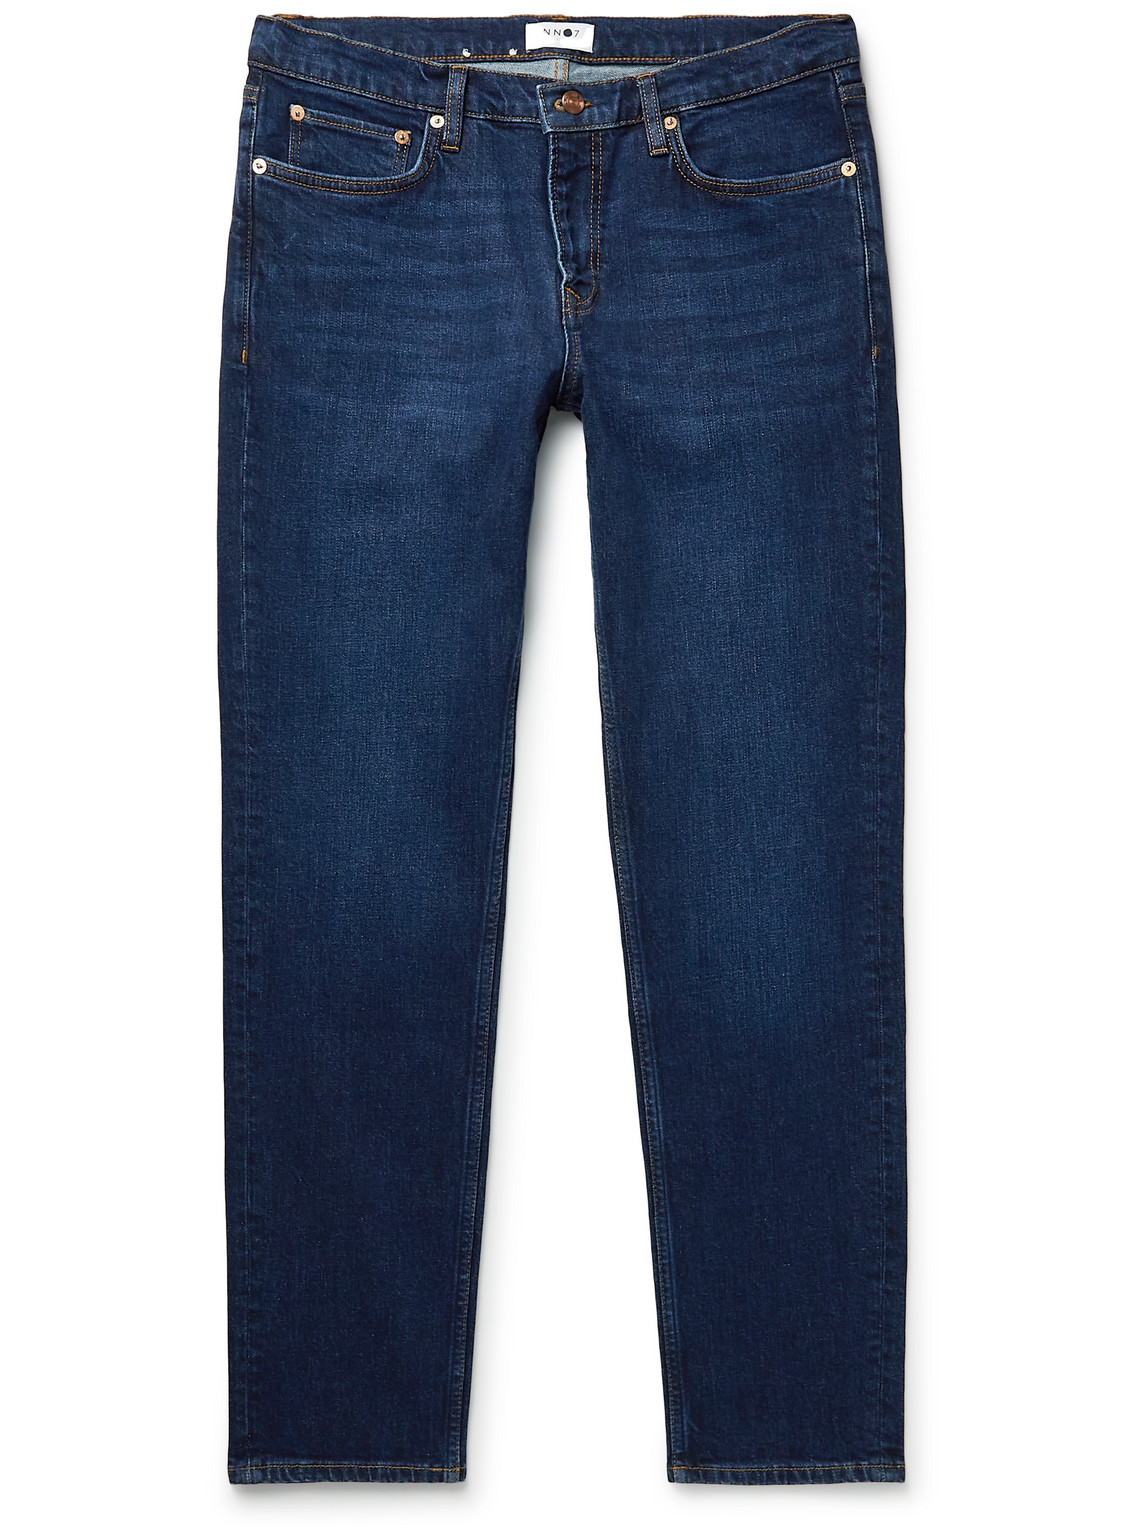 Slater 1838 Slim-Fit Tapered Distressed Jeans